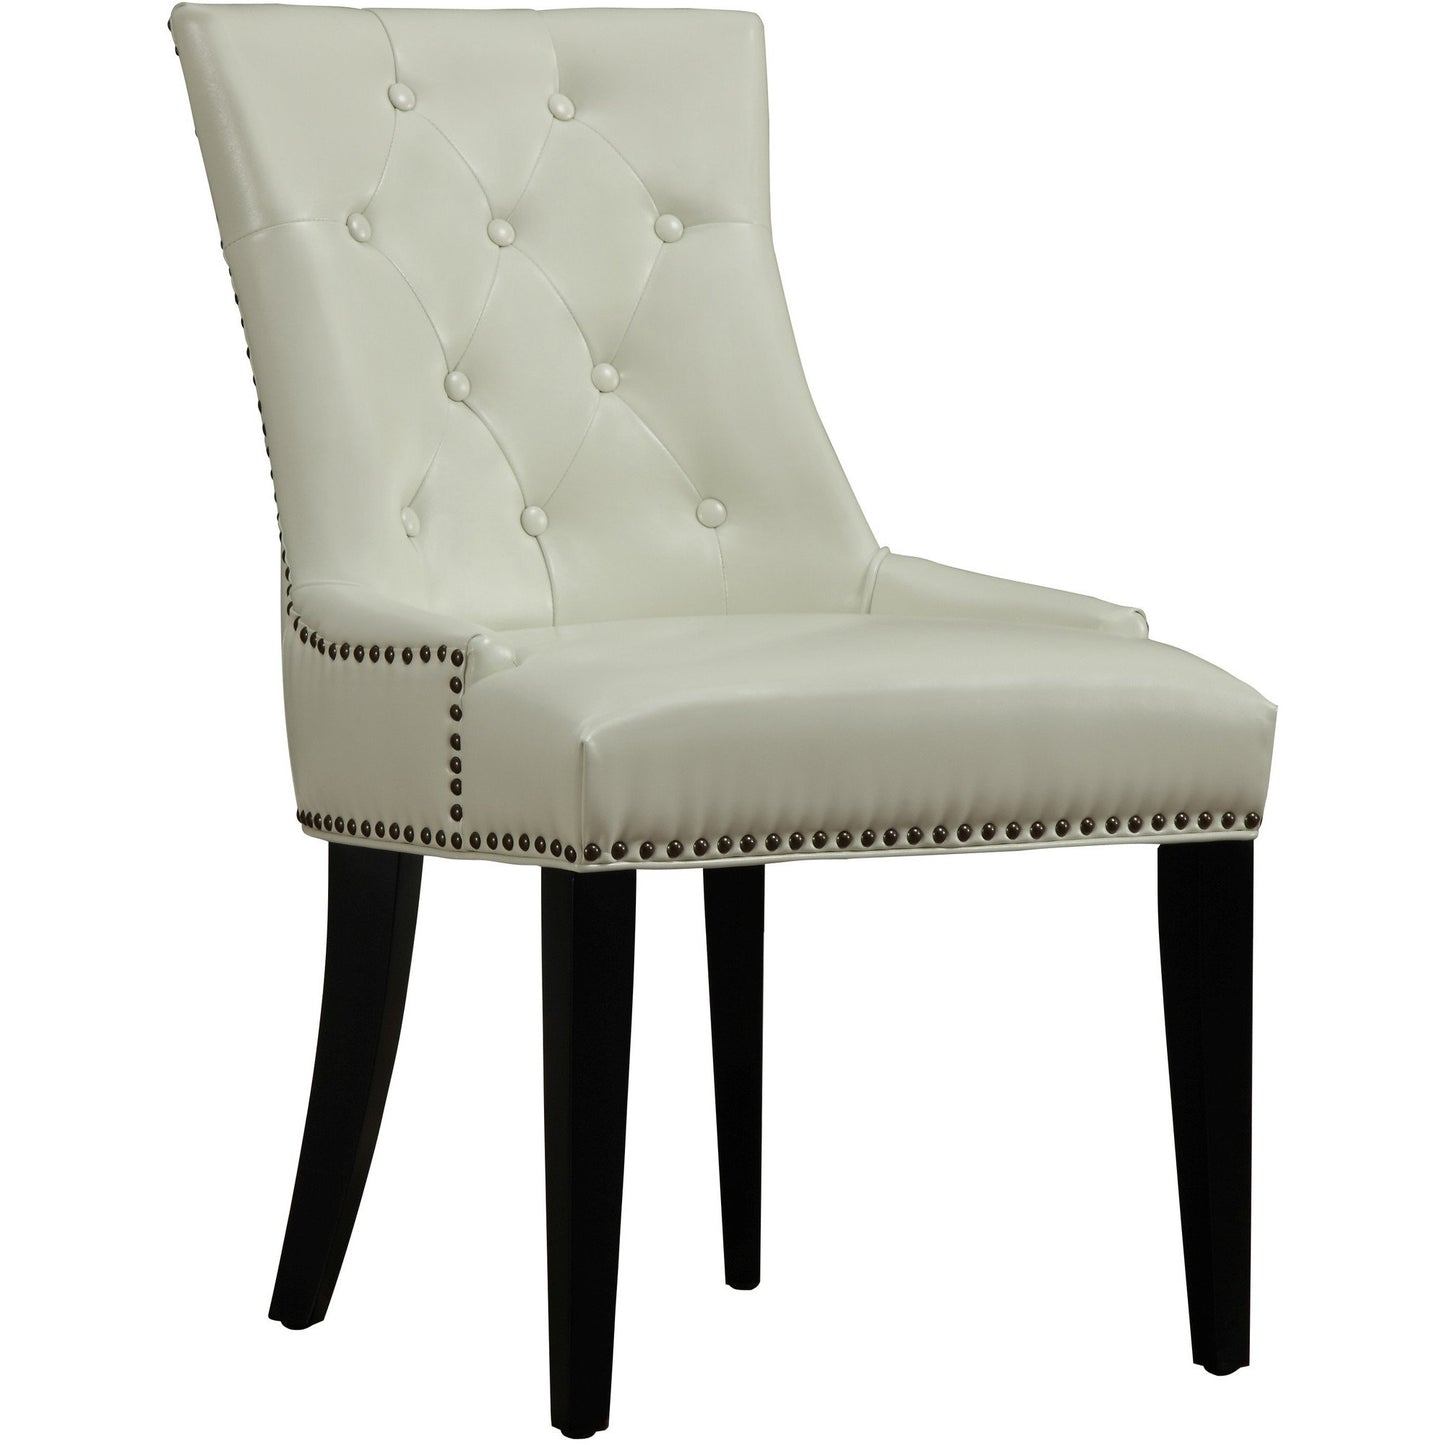 Chic Cream Leather Dining Chair - living-essentials